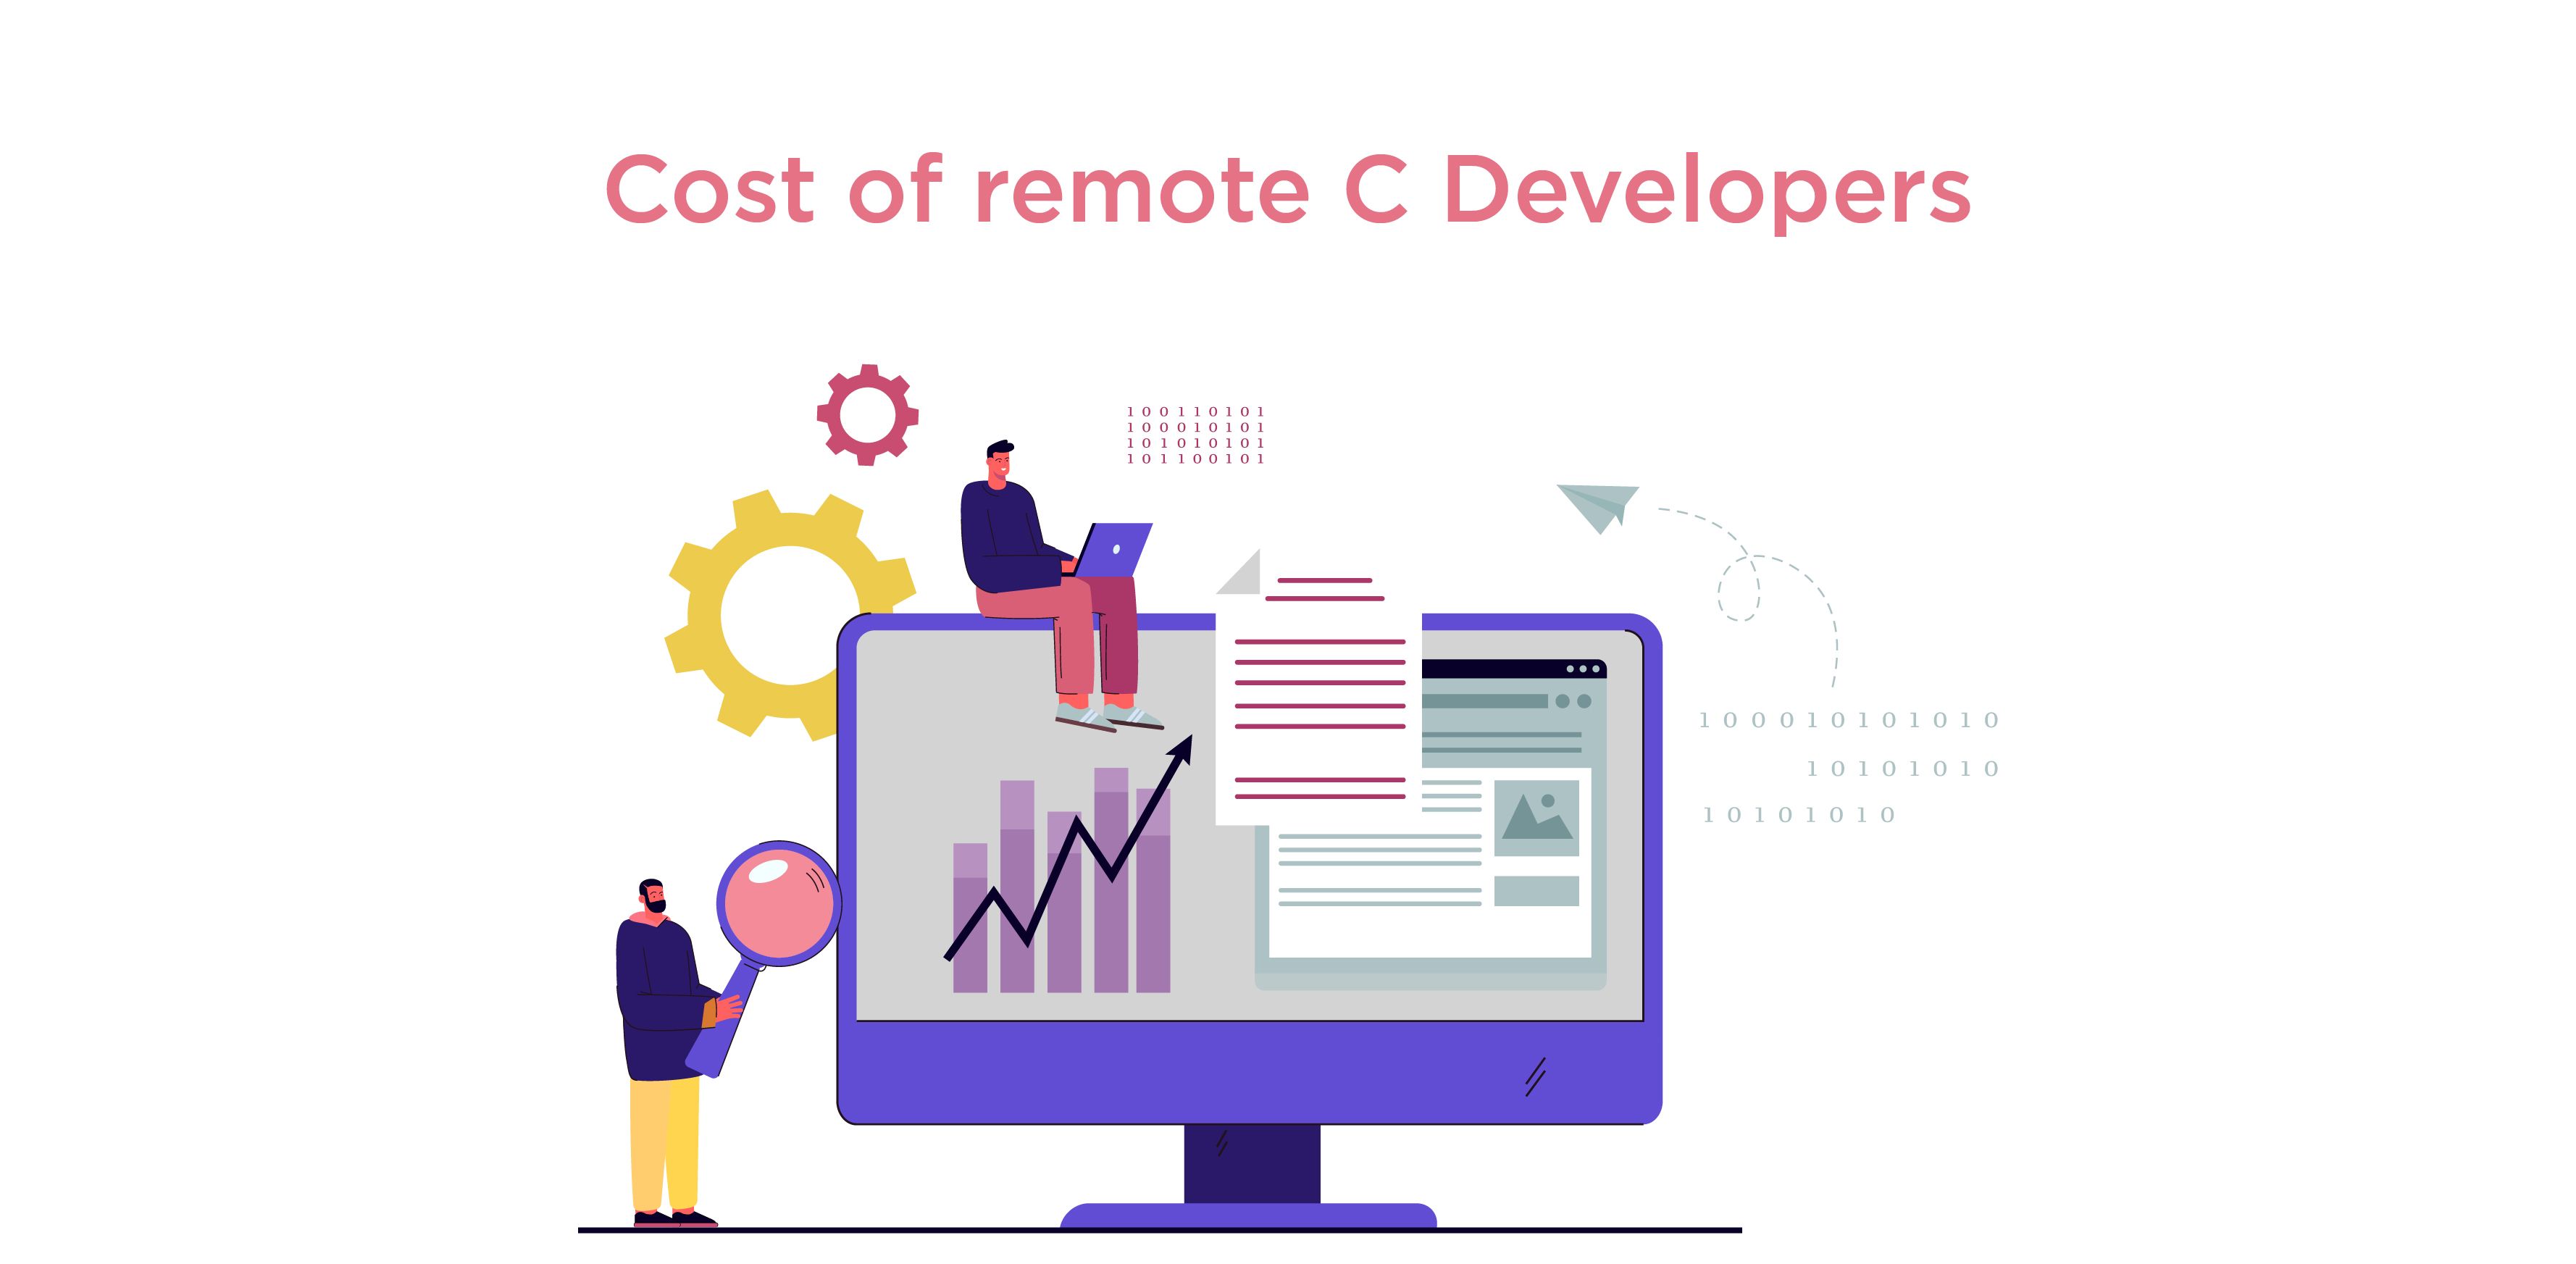 Hiring cost of remote C Developers 